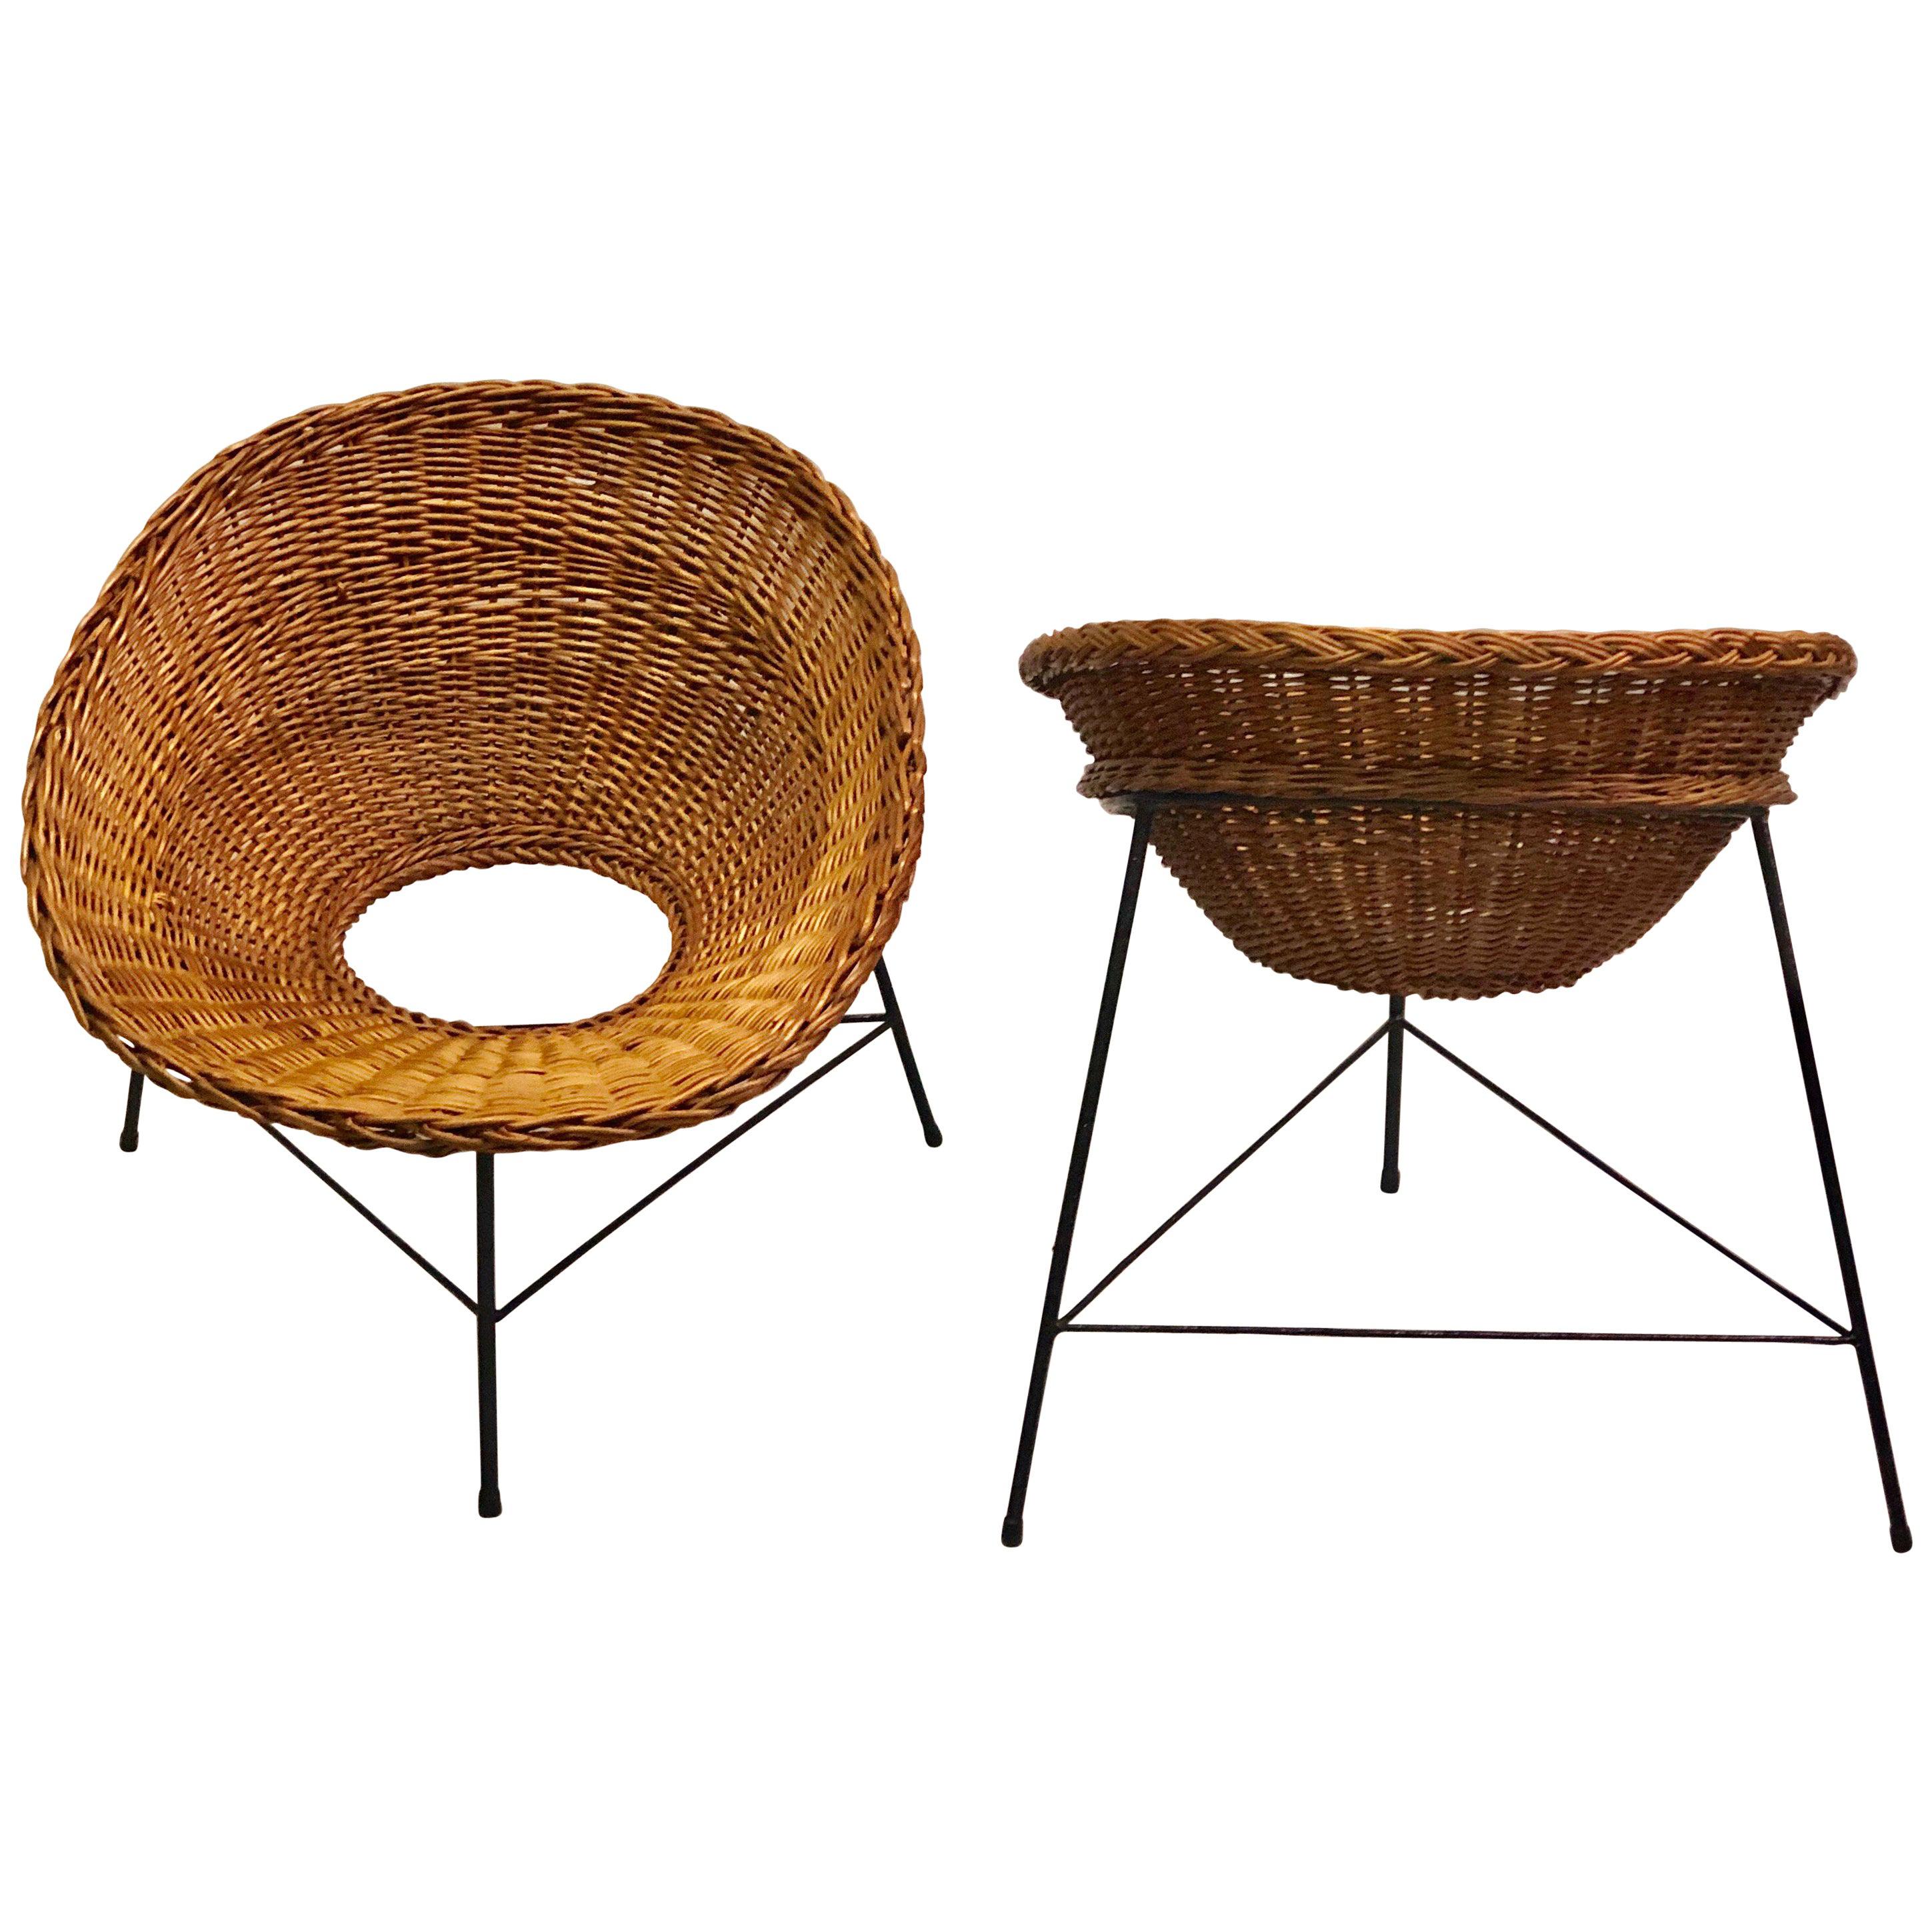 Italian Mid-century Iron and Rattan Lounge Chairs Augusto Bozzi Attributed, Pair For Sale